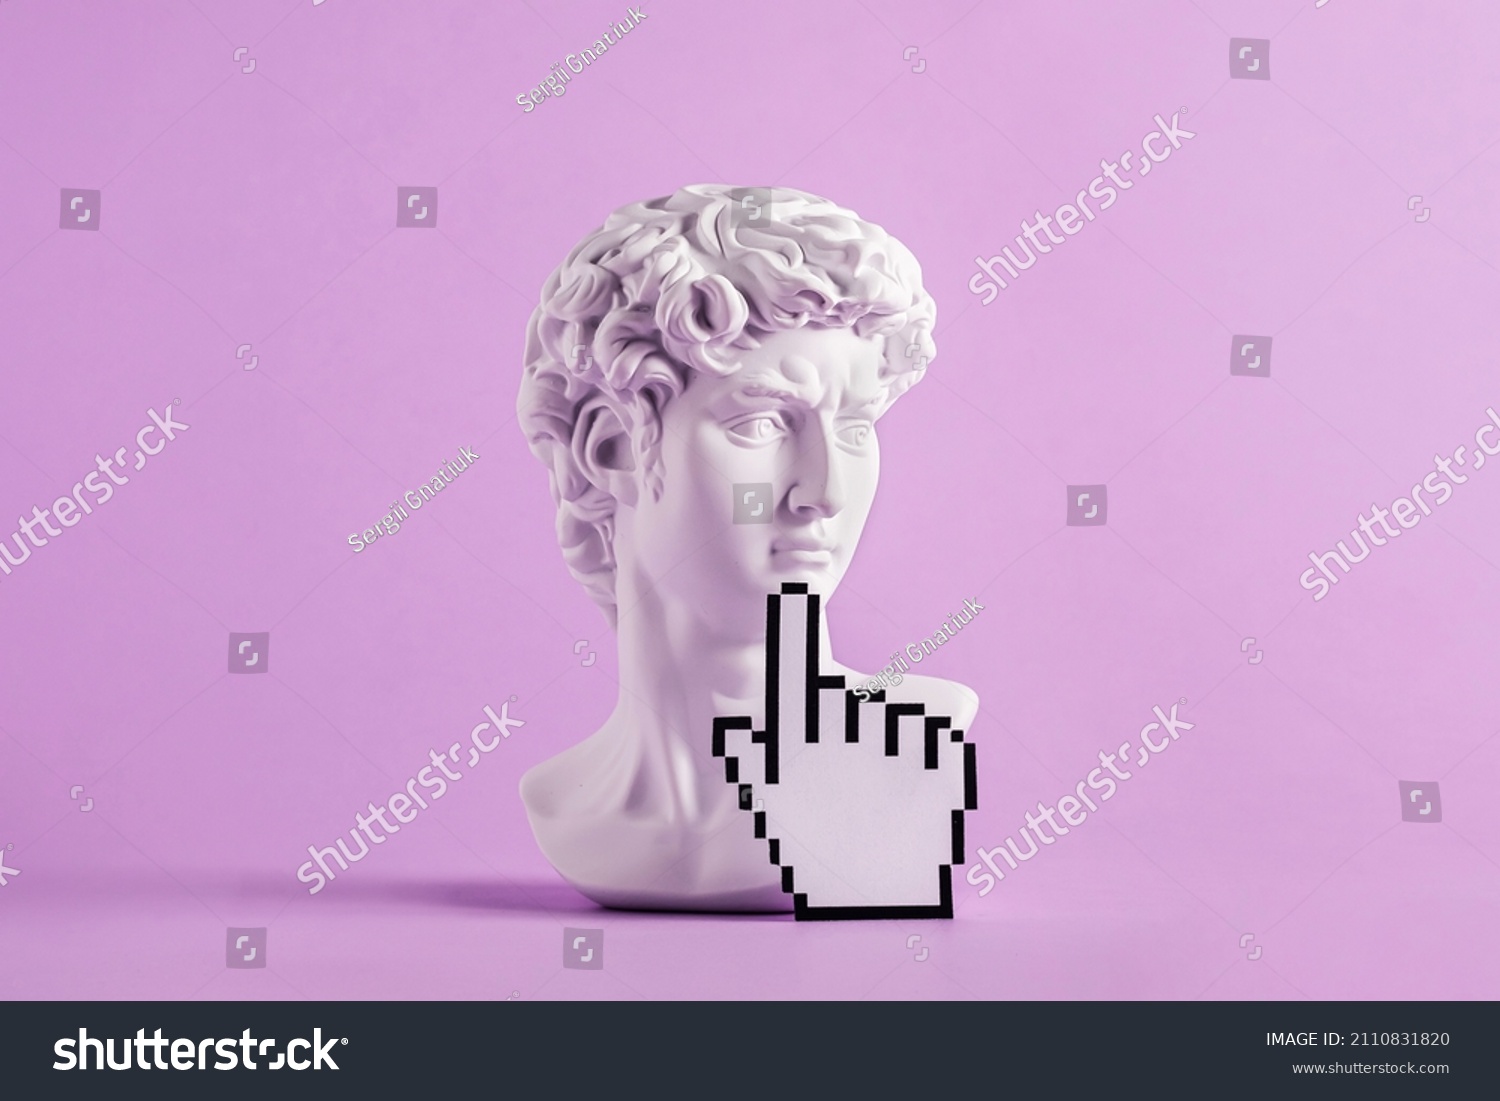 Historical antique statue of david's head and mouse cursor with finger. Concept of modern art and vaporwave and cyberpunk #2110831820